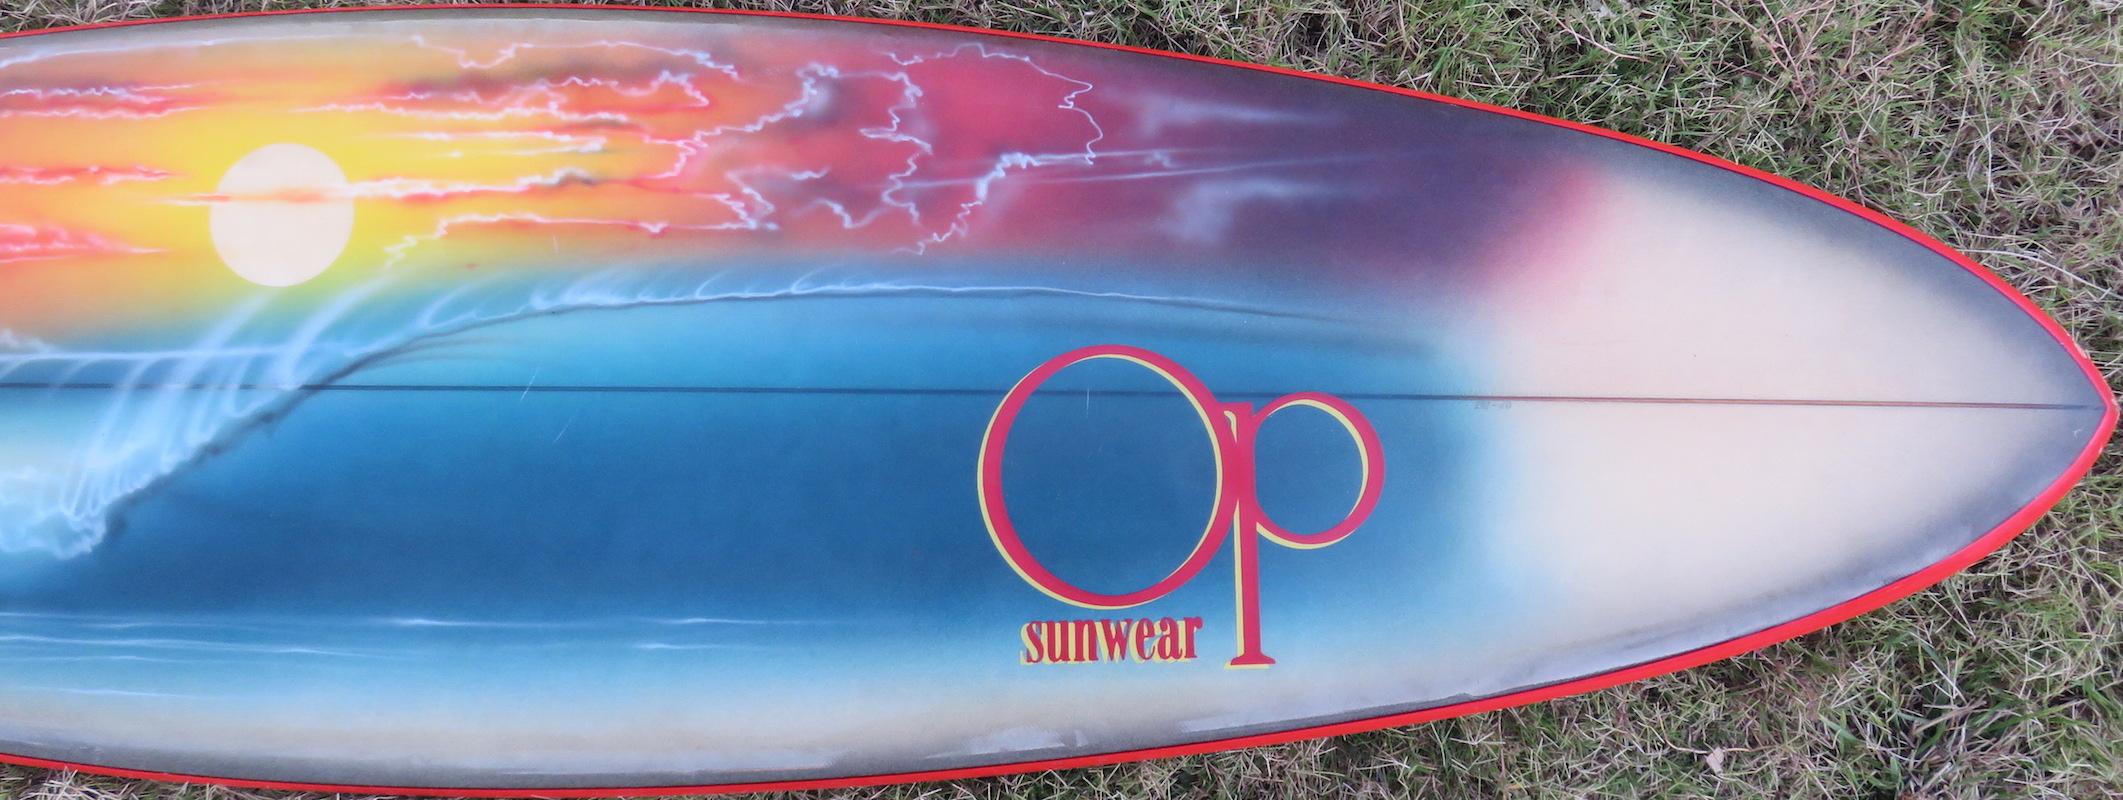 airbrushed surfboard